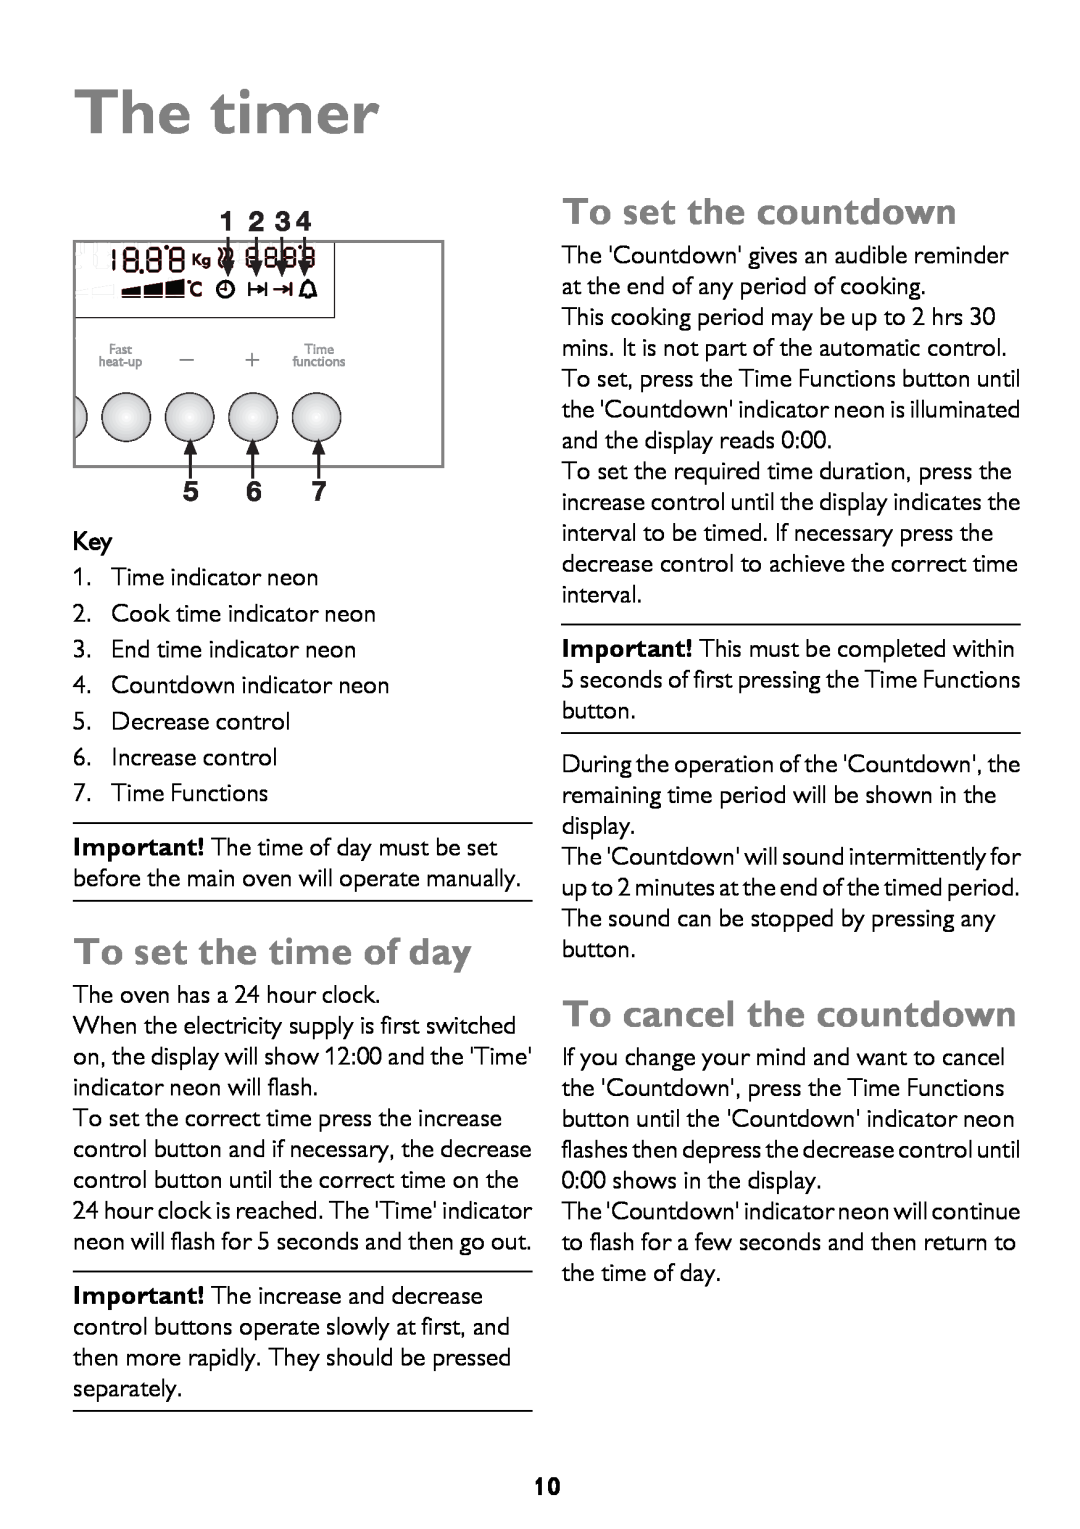 John Lewis JLBIDO911 instruction manual The timer, To set the time of day, To set the countdown, To cancel the countdown 